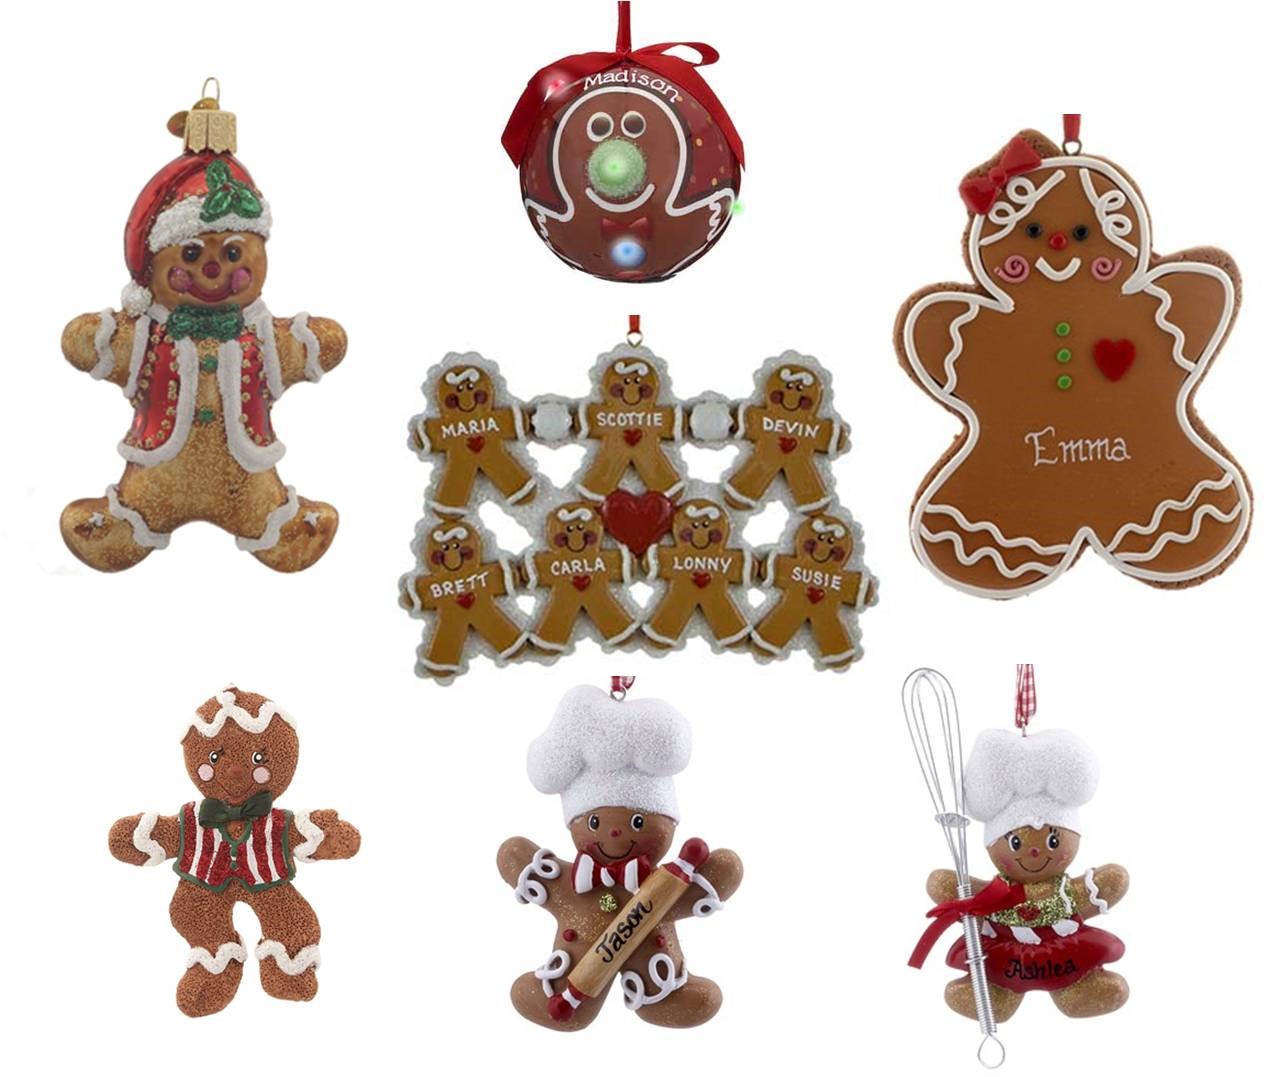 A variety of gingerbread ornaments for you to purchase including a gingerbread chef, a gingerbread Santa, and a gingerbread family of seven | OrnamentShop.com